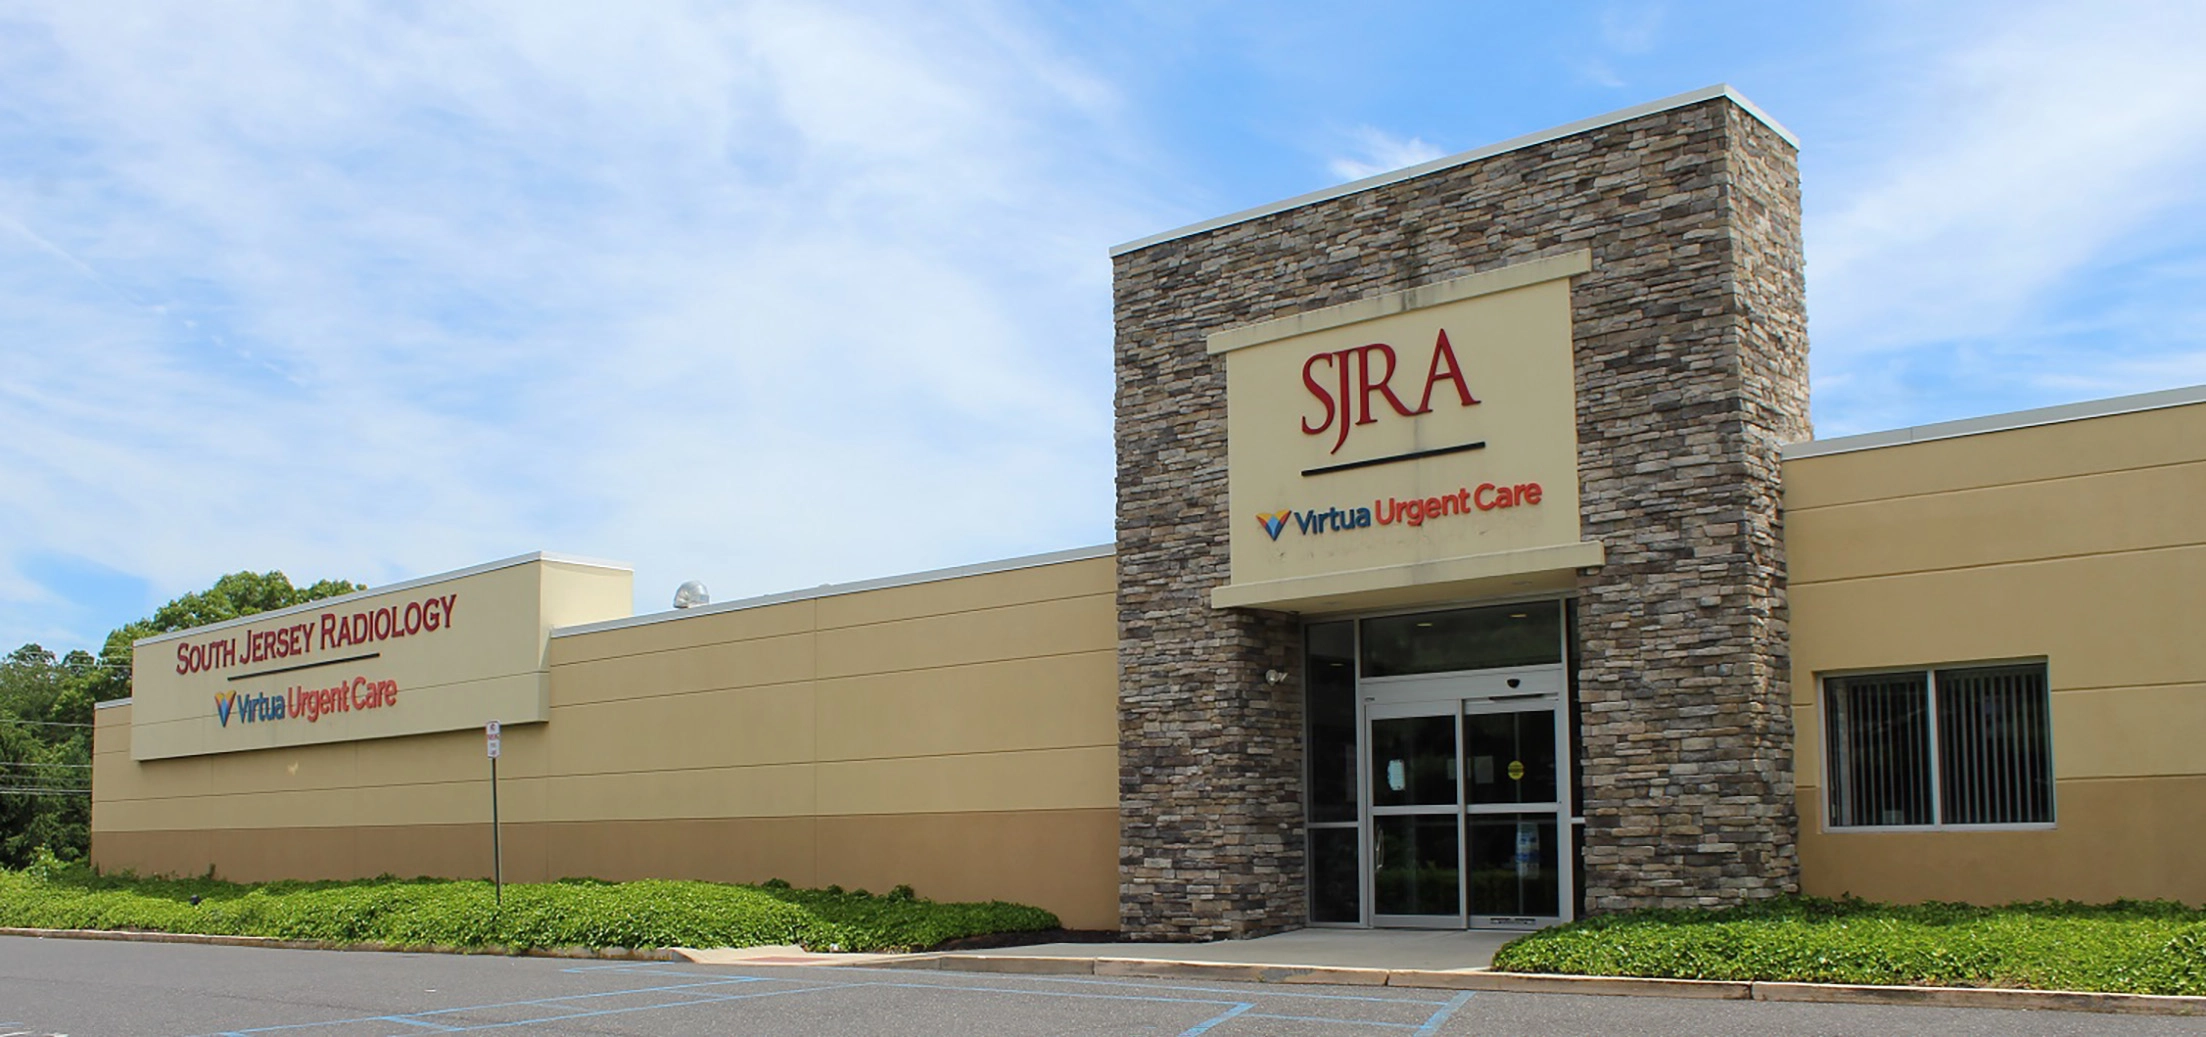 South Jersey Radiology Associates Route 73 Office Front Entrance